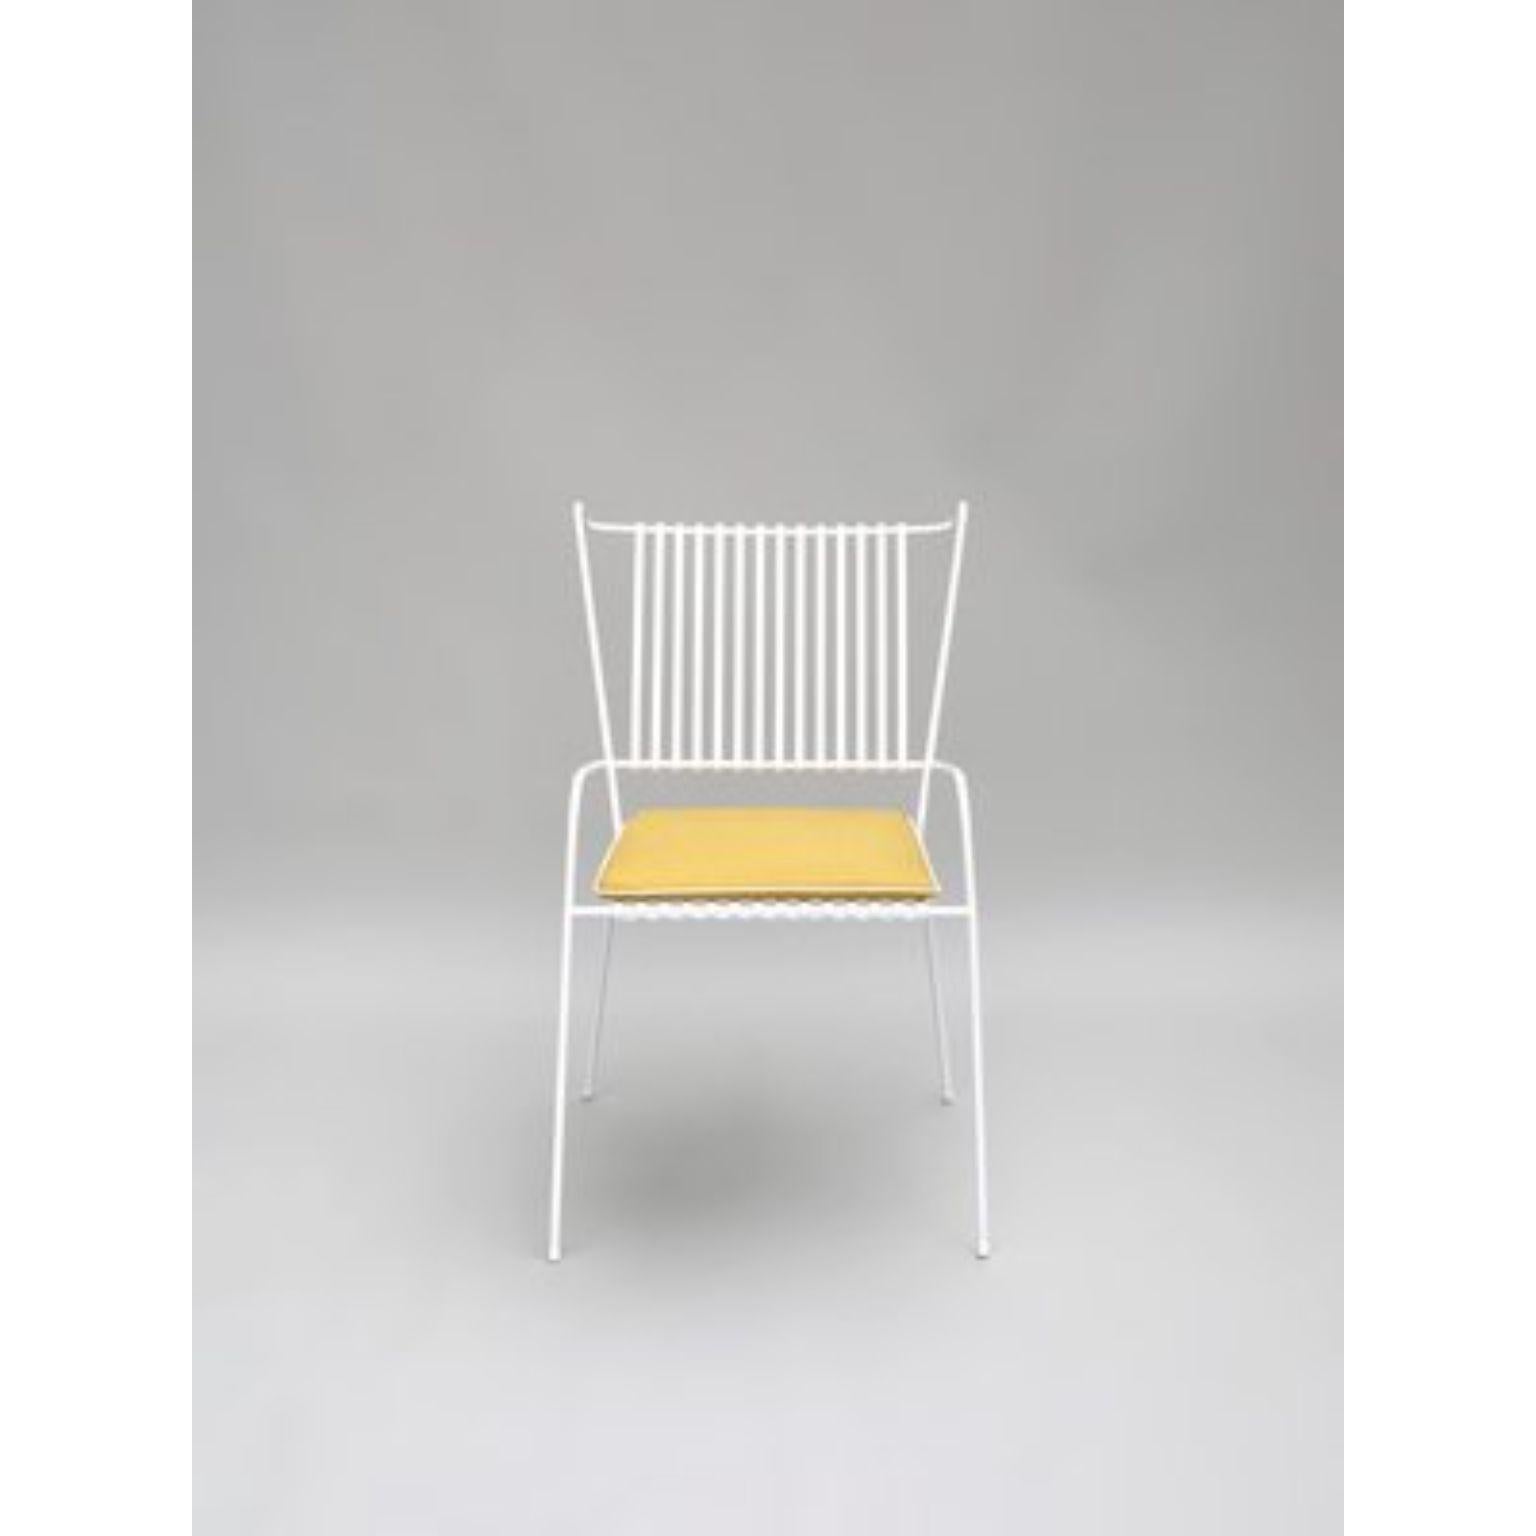 White Capri chair with seat cushion by Cools Collection
Materials: Powder coated stainless steel, fabric suitable for outdoor use.
Dimensions: Chair: W 53 x D 60 x H 86 cm (seat height 45 cm).
Cushion: W 42 x D 42 x H 2cm.
Available in white or